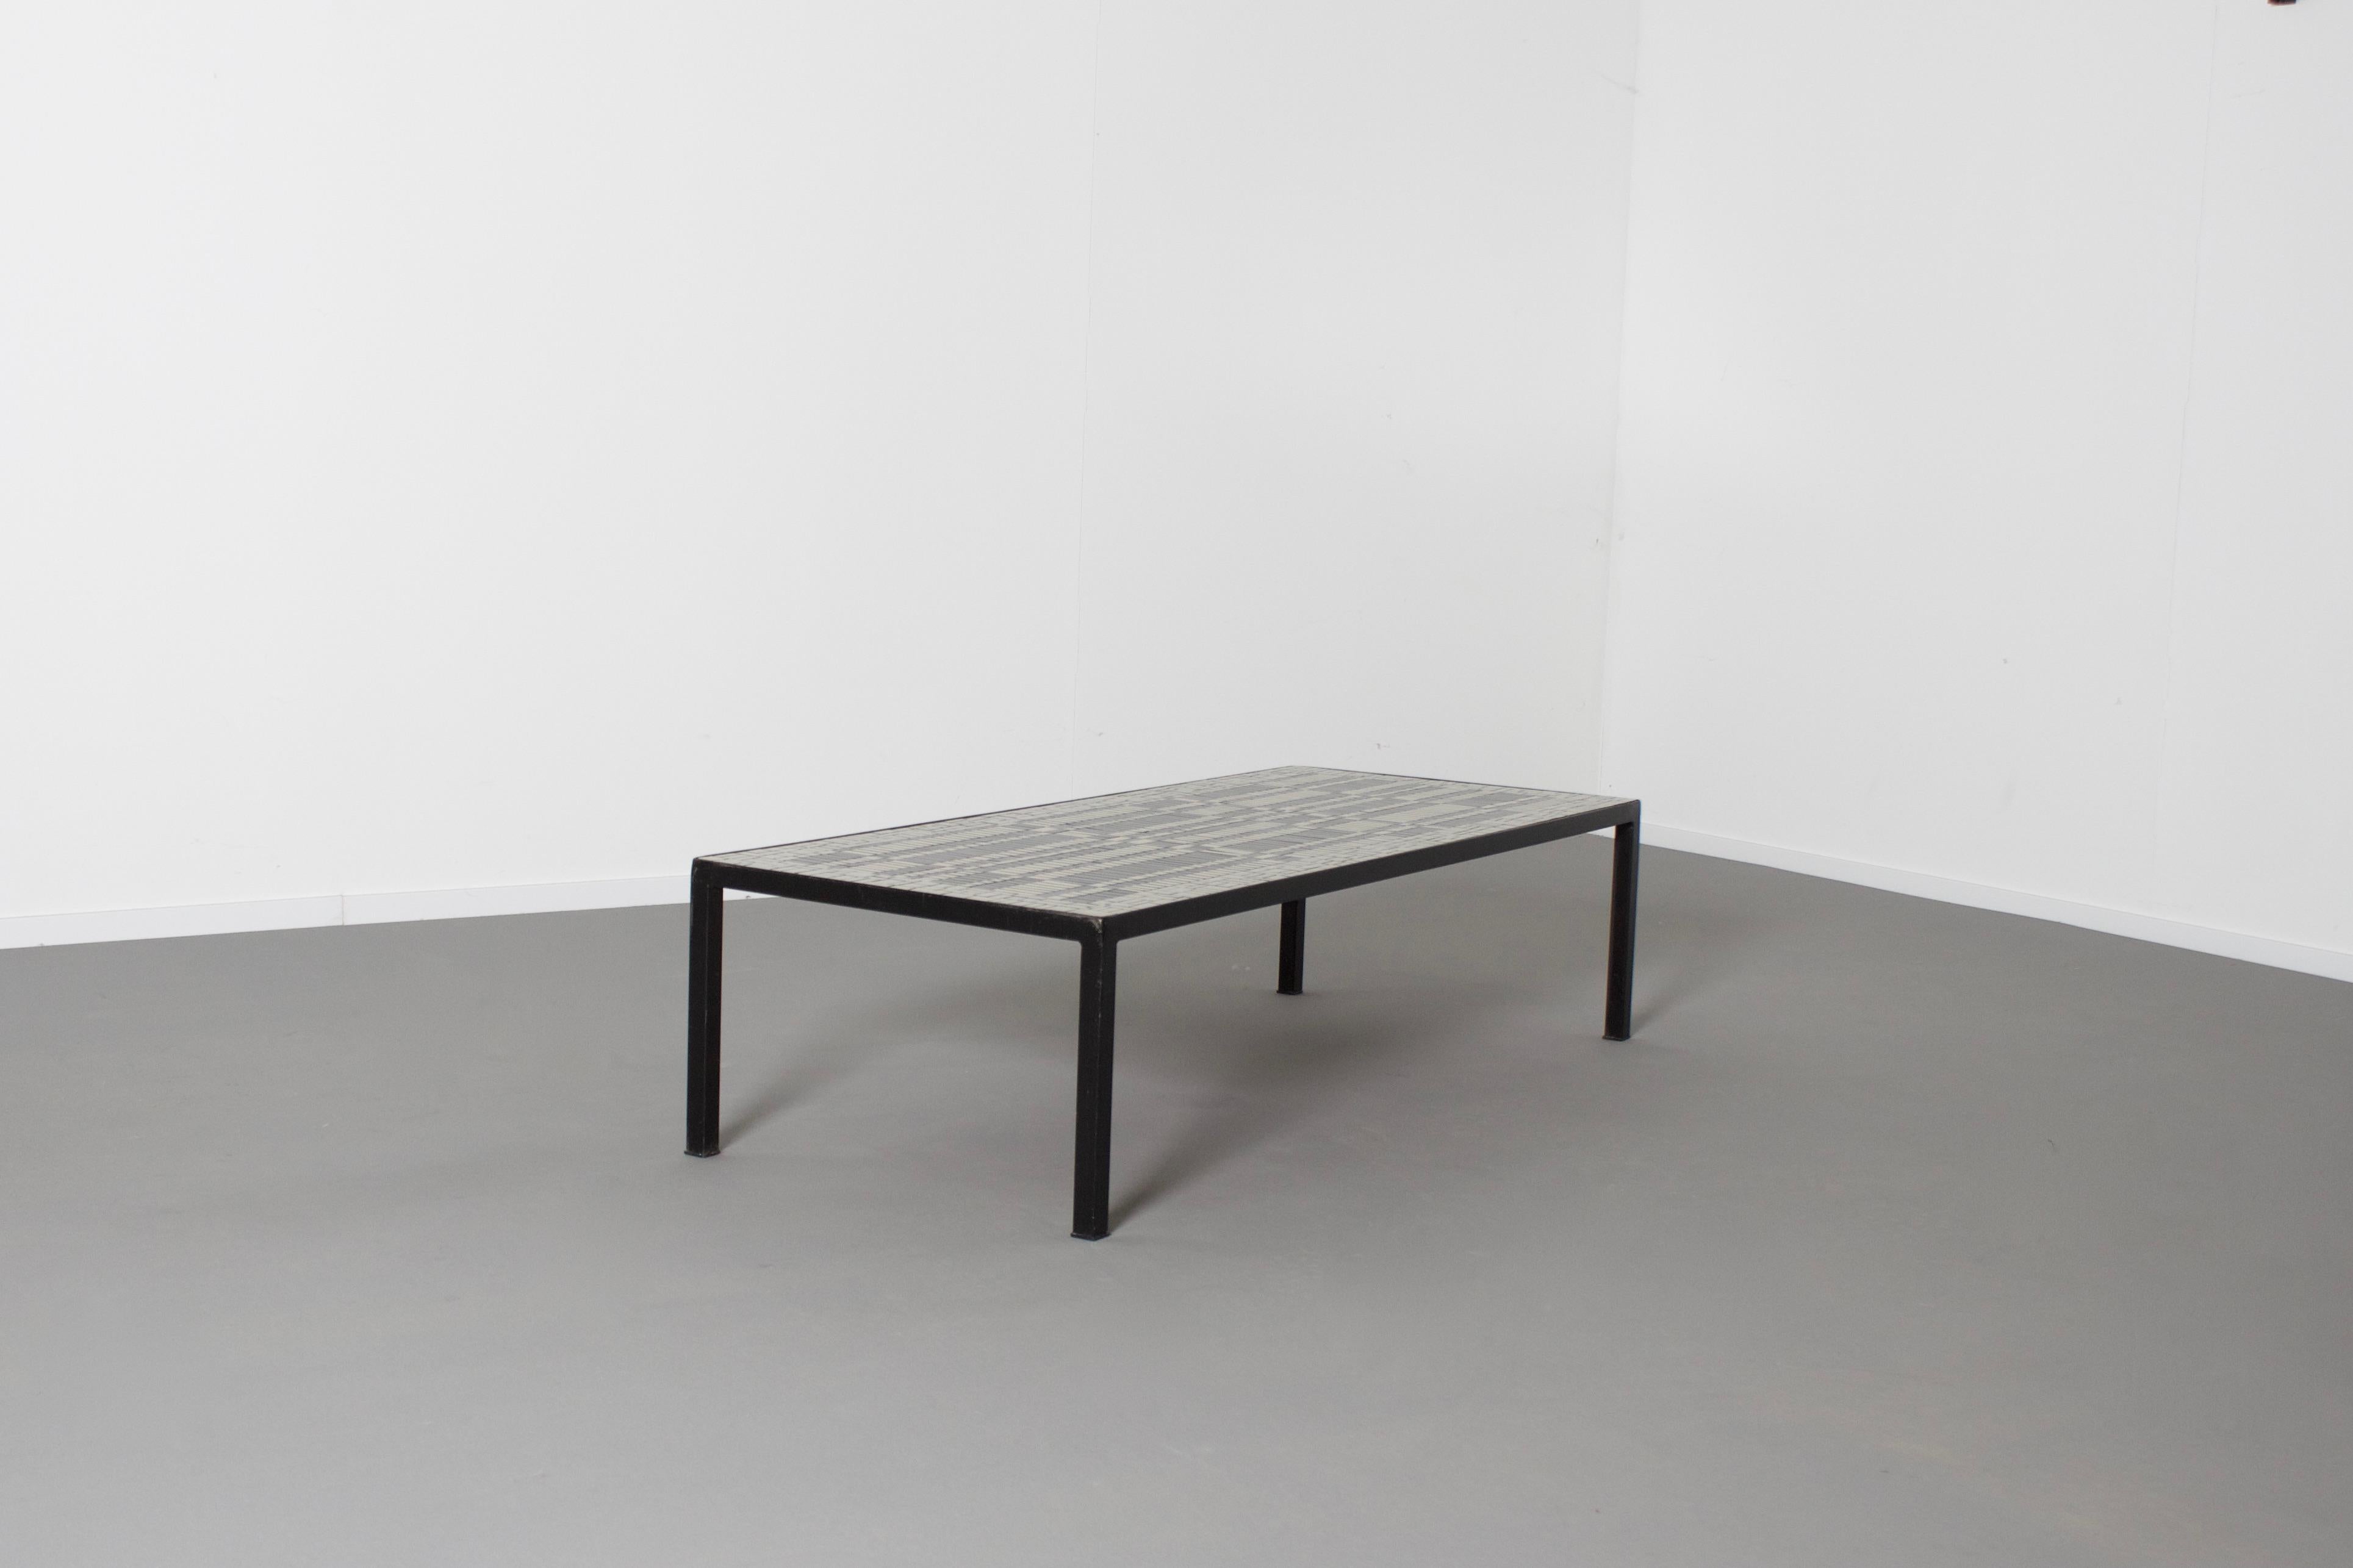 Impressive coffee table by Berthold Müller in good condition. 

Manufactured by Mosaikwerkstatt Berthold Müller-Oerlinghaus. 

The mosaic top of these tables is composed of tiles in black and white. 

The rim of the top is made of black metal. 

The